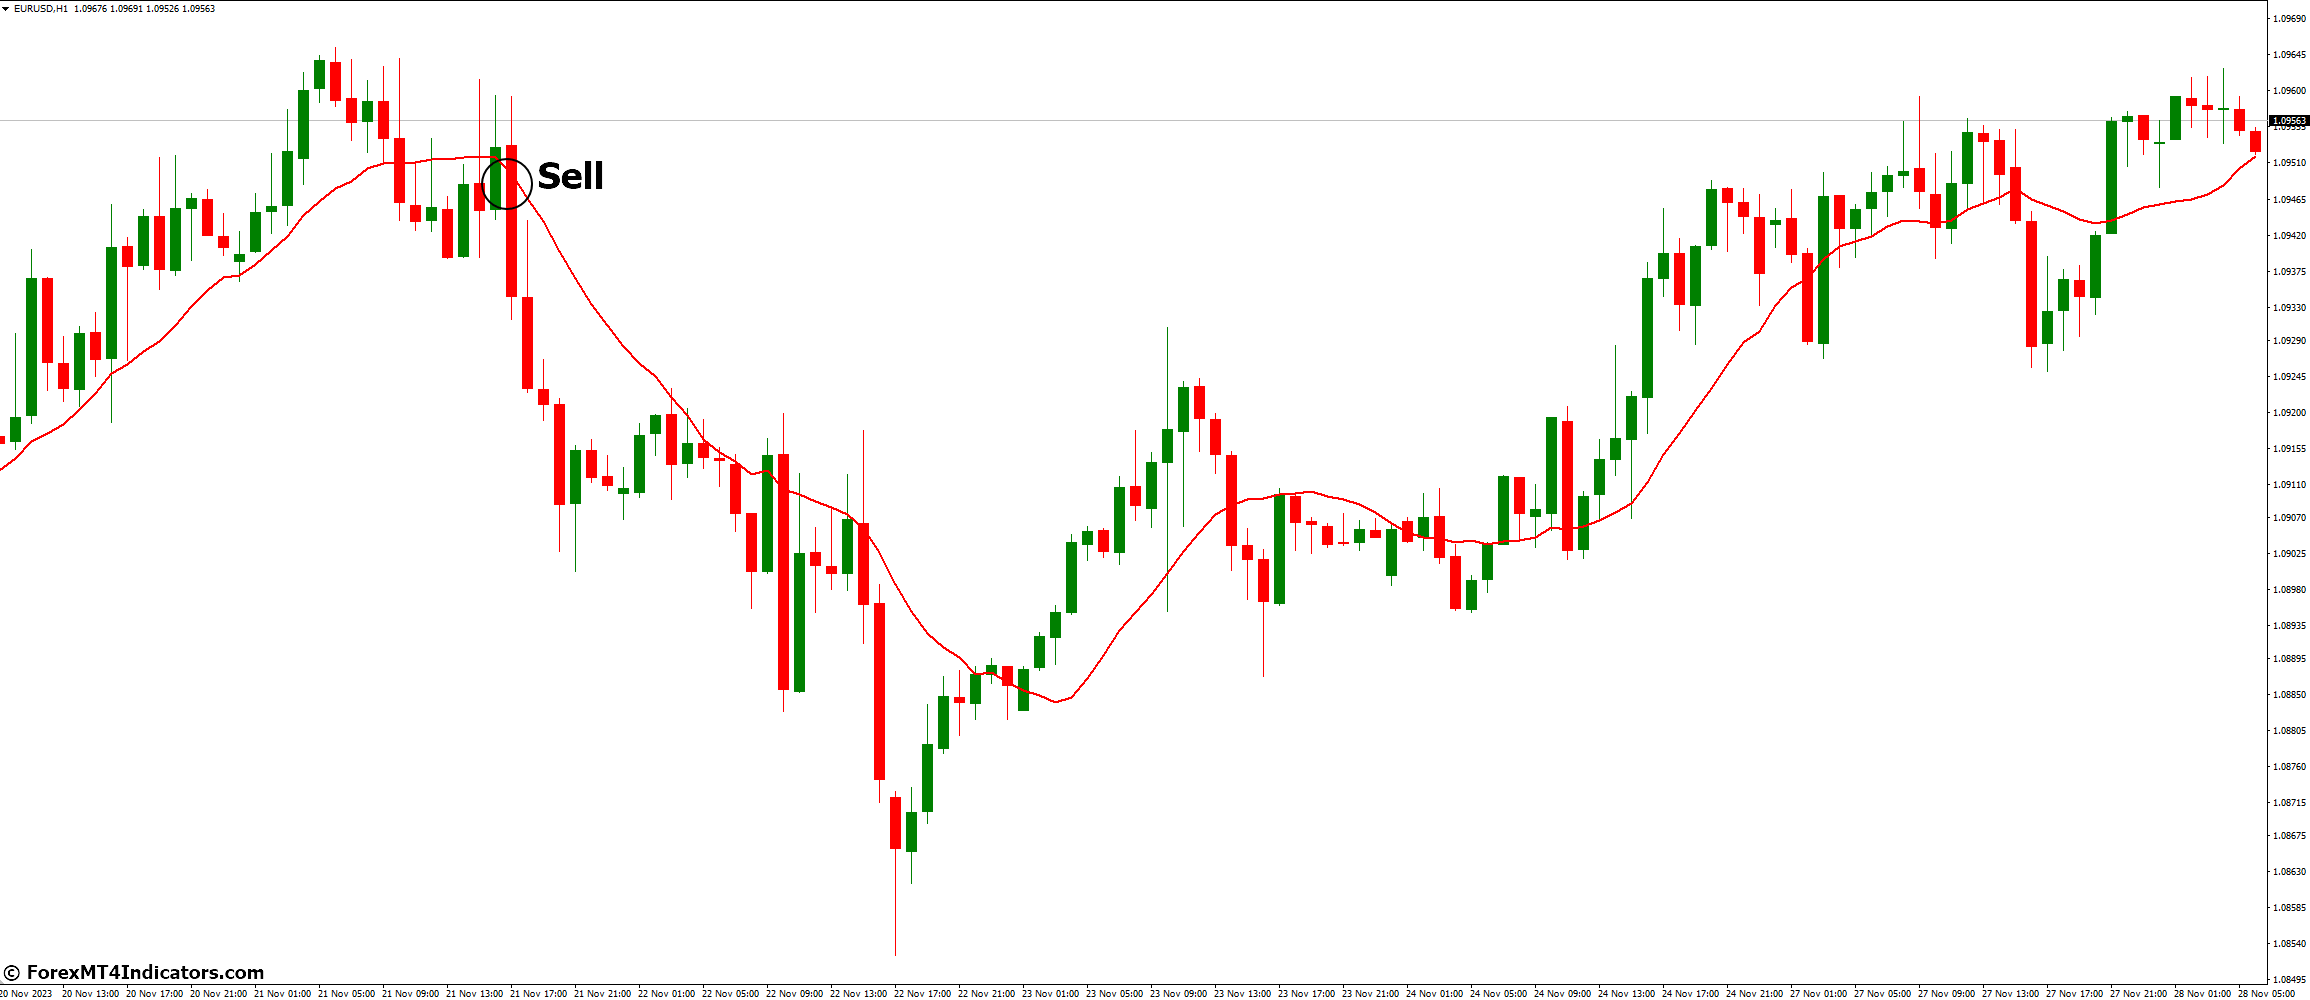 How to Trade with Moving Average Indicator - Sell Entry